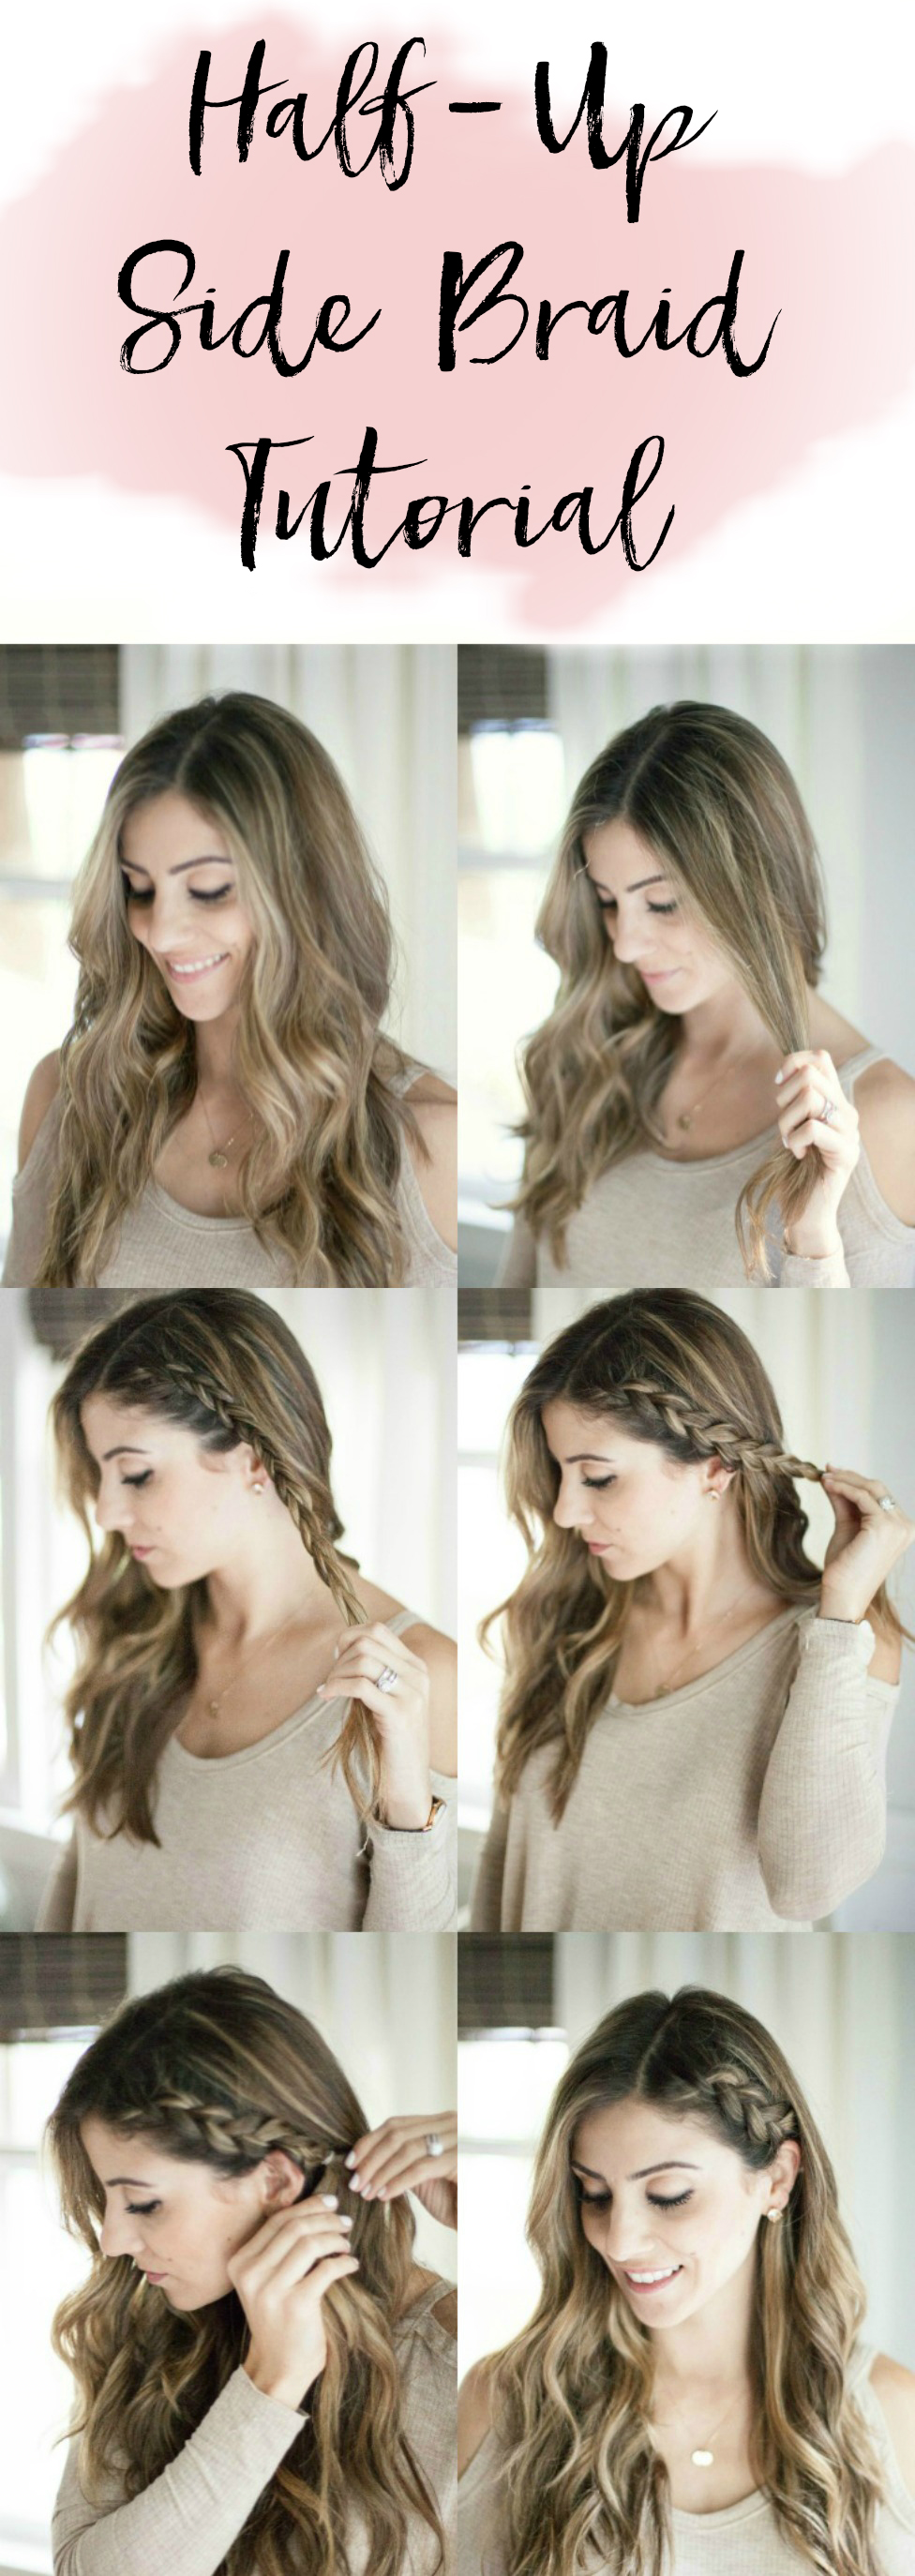 A simple half up side braid hair tutorial perfect for adding a little elegance to your normal hair style!